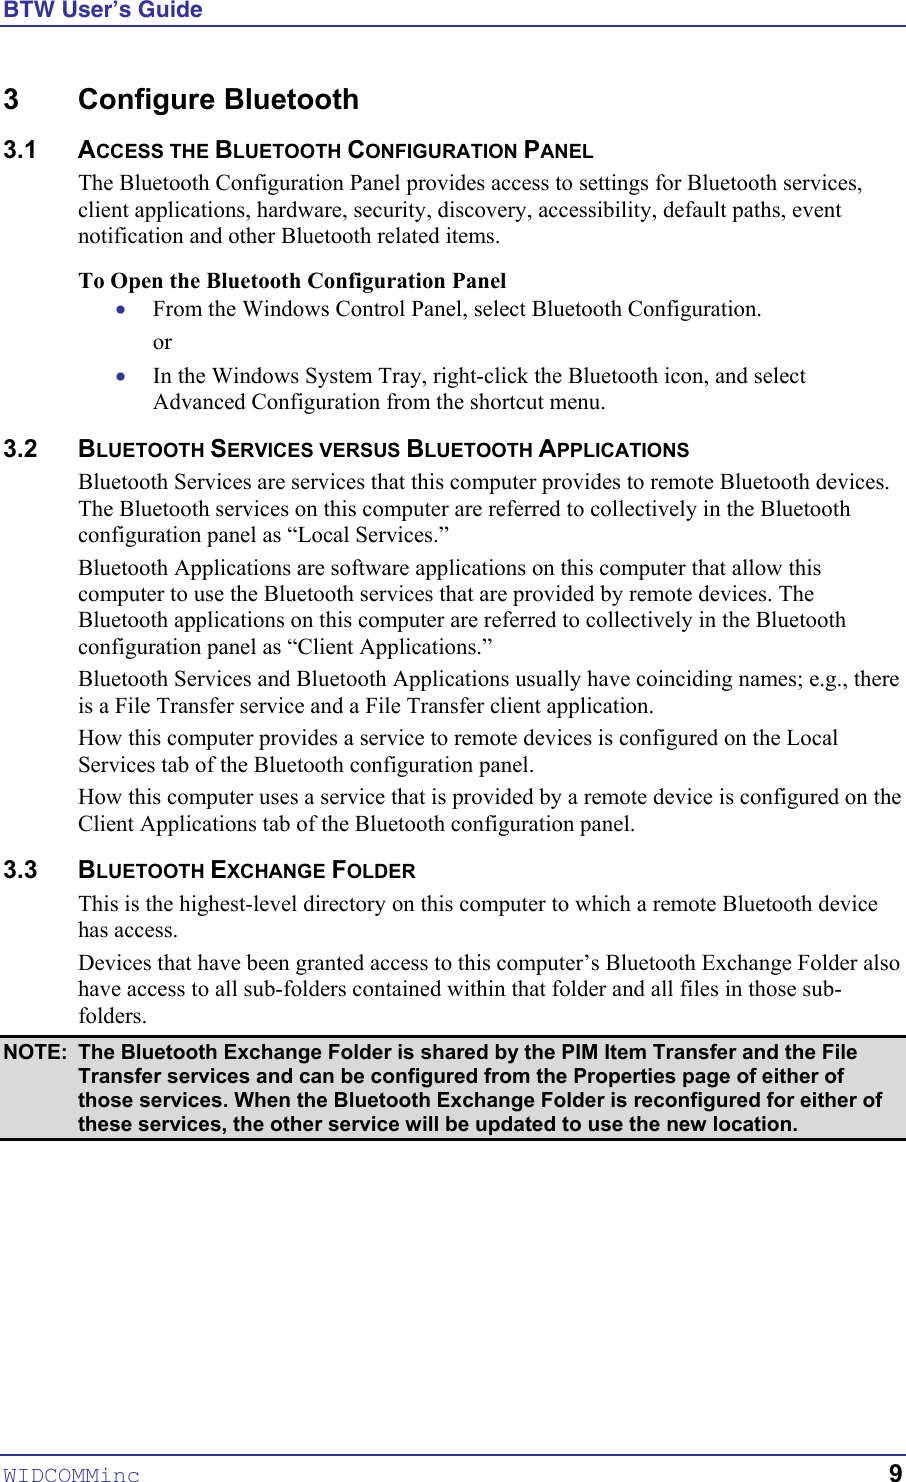 BTW User’s Guide WIDCOMMinc   9 3 Configure Bluetooth 3.1 ACCESS THE BLUETOOTH CONFIGURATION PANEL The Bluetooth Configuration Panel provides access to settings for Bluetooth services, client applications, hardware, security, discovery, accessibility, default paths, event notification and other Bluetooth related items. To Open the Bluetooth Configuration Panel • • From the Windows Control Panel, select Bluetooth Configuration. or In the Windows System Tray, right-click the Bluetooth icon, and select Advanced Configuration from the shortcut menu. 3.2 BLUETOOTH SERVICES VERSUS BLUETOOTH APPLICATIONS Bluetooth Services are services that this computer provides to remote Bluetooth devices. The Bluetooth services on this computer are referred to collectively in the Bluetooth configuration panel as “Local Services.” Bluetooth Applications are software applications on this computer that allow this computer to use the Bluetooth services that are provided by remote devices. The Bluetooth applications on this computer are referred to collectively in the Bluetooth configuration panel as “Client Applications.” Bluetooth Services and Bluetooth Applications usually have coinciding names; e.g., there is a File Transfer service and a File Transfer client application. How this computer provides a service to remote devices is configured on the Local Services tab of the Bluetooth configuration panel. How this computer uses a service that is provided by a remote device is configured on the Client Applications tab of the Bluetooth configuration panel. 3.3 BLUETOOTH EXCHANGE FOLDER This is the highest-level directory on this computer to which a remote Bluetooth device has access. Devices that have been granted access to this computer’s Bluetooth Exchange Folder also have access to all sub-folders contained within that folder and all files in those sub-folders. NOTE:  The Bluetooth Exchange Folder is shared by the PIM Item Transfer and the File Transfer services and can be configured from the Properties page of either of those services. When the Bluetooth Exchange Folder is reconfigured for either of these services, the other service will be updated to use the new location. 